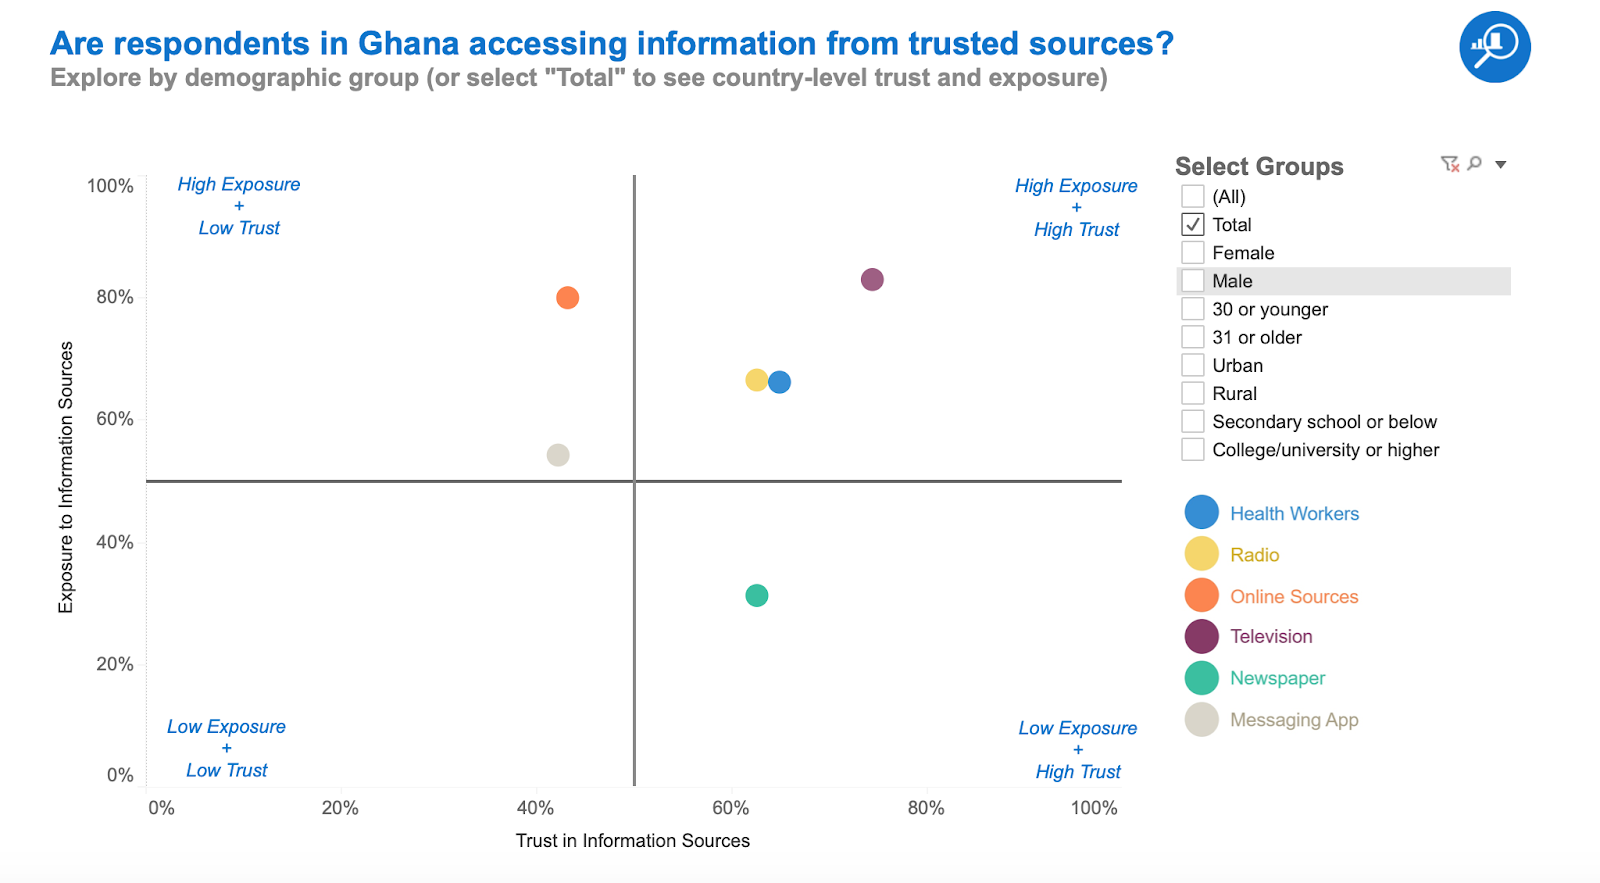 Are respondents in Ghana accessing information from trusted sources?